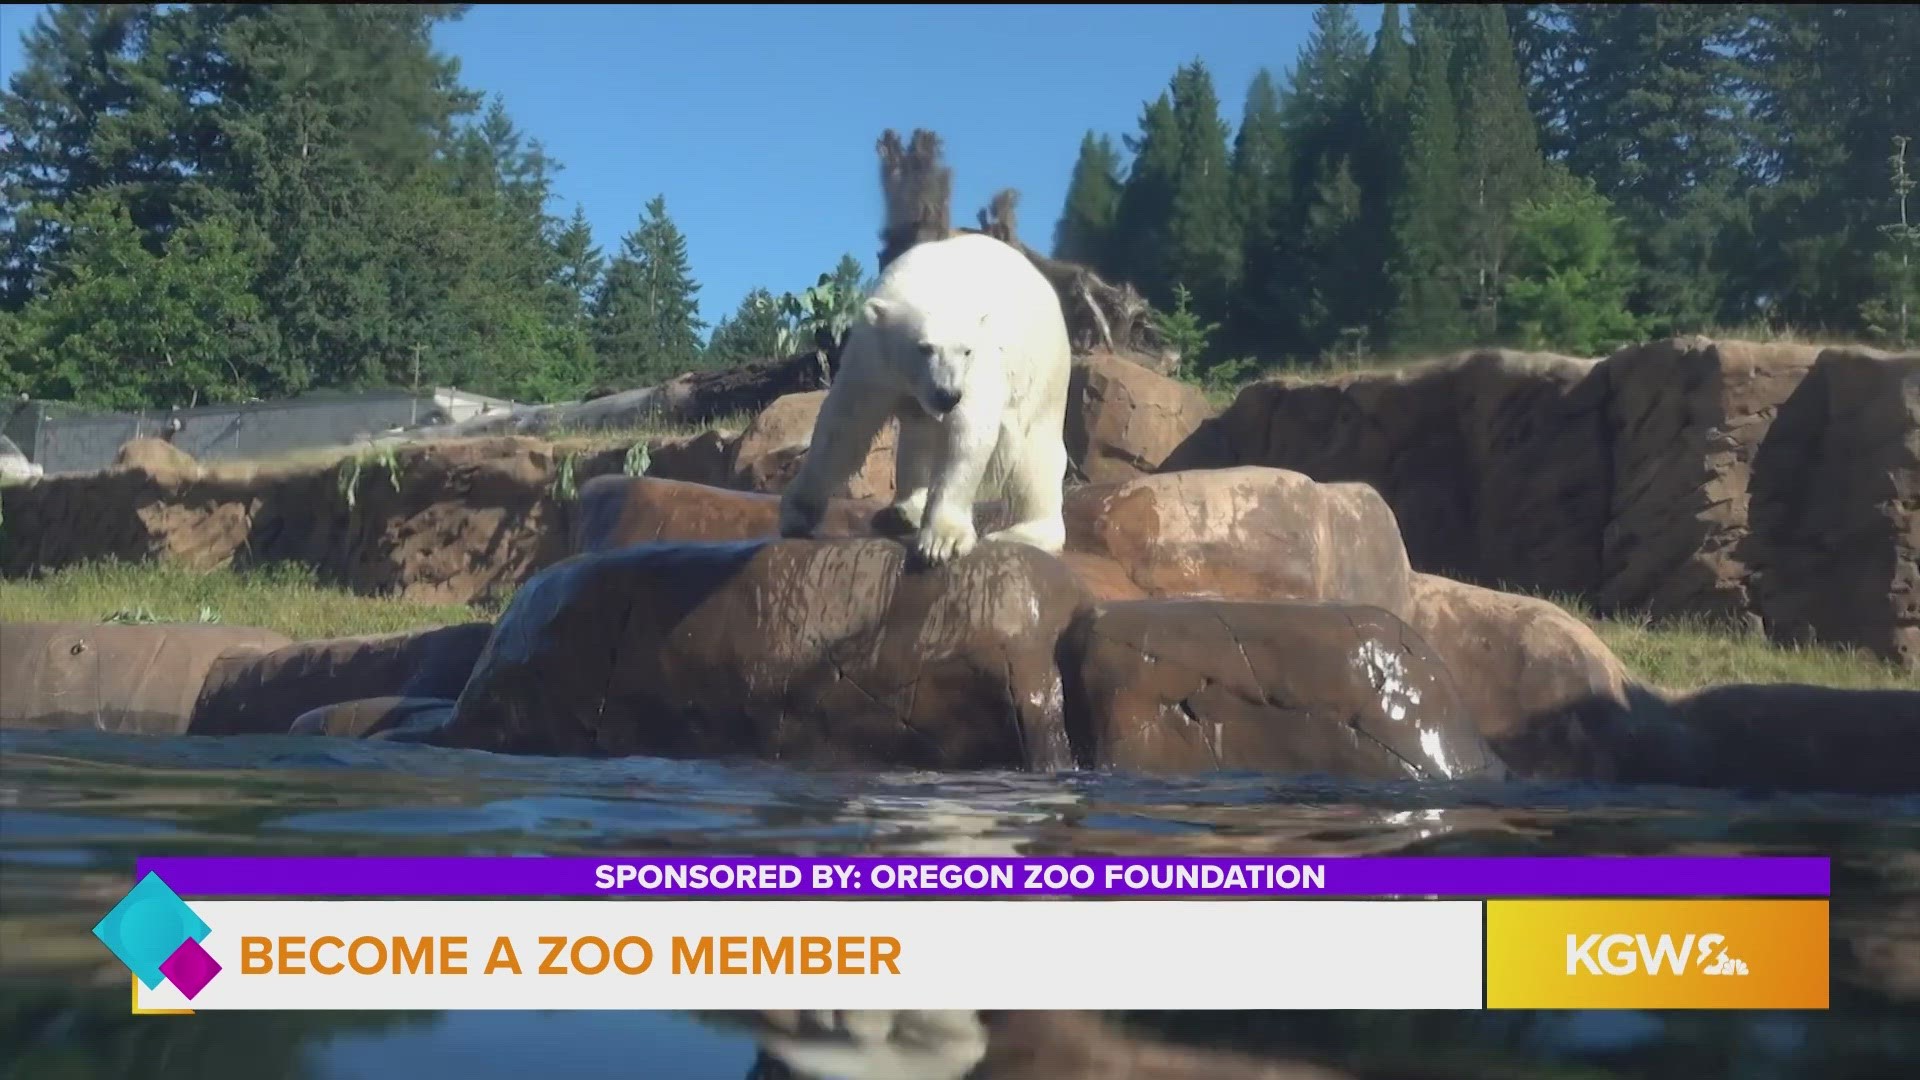 This segment is sponsored by Oregon Zoo Foundation